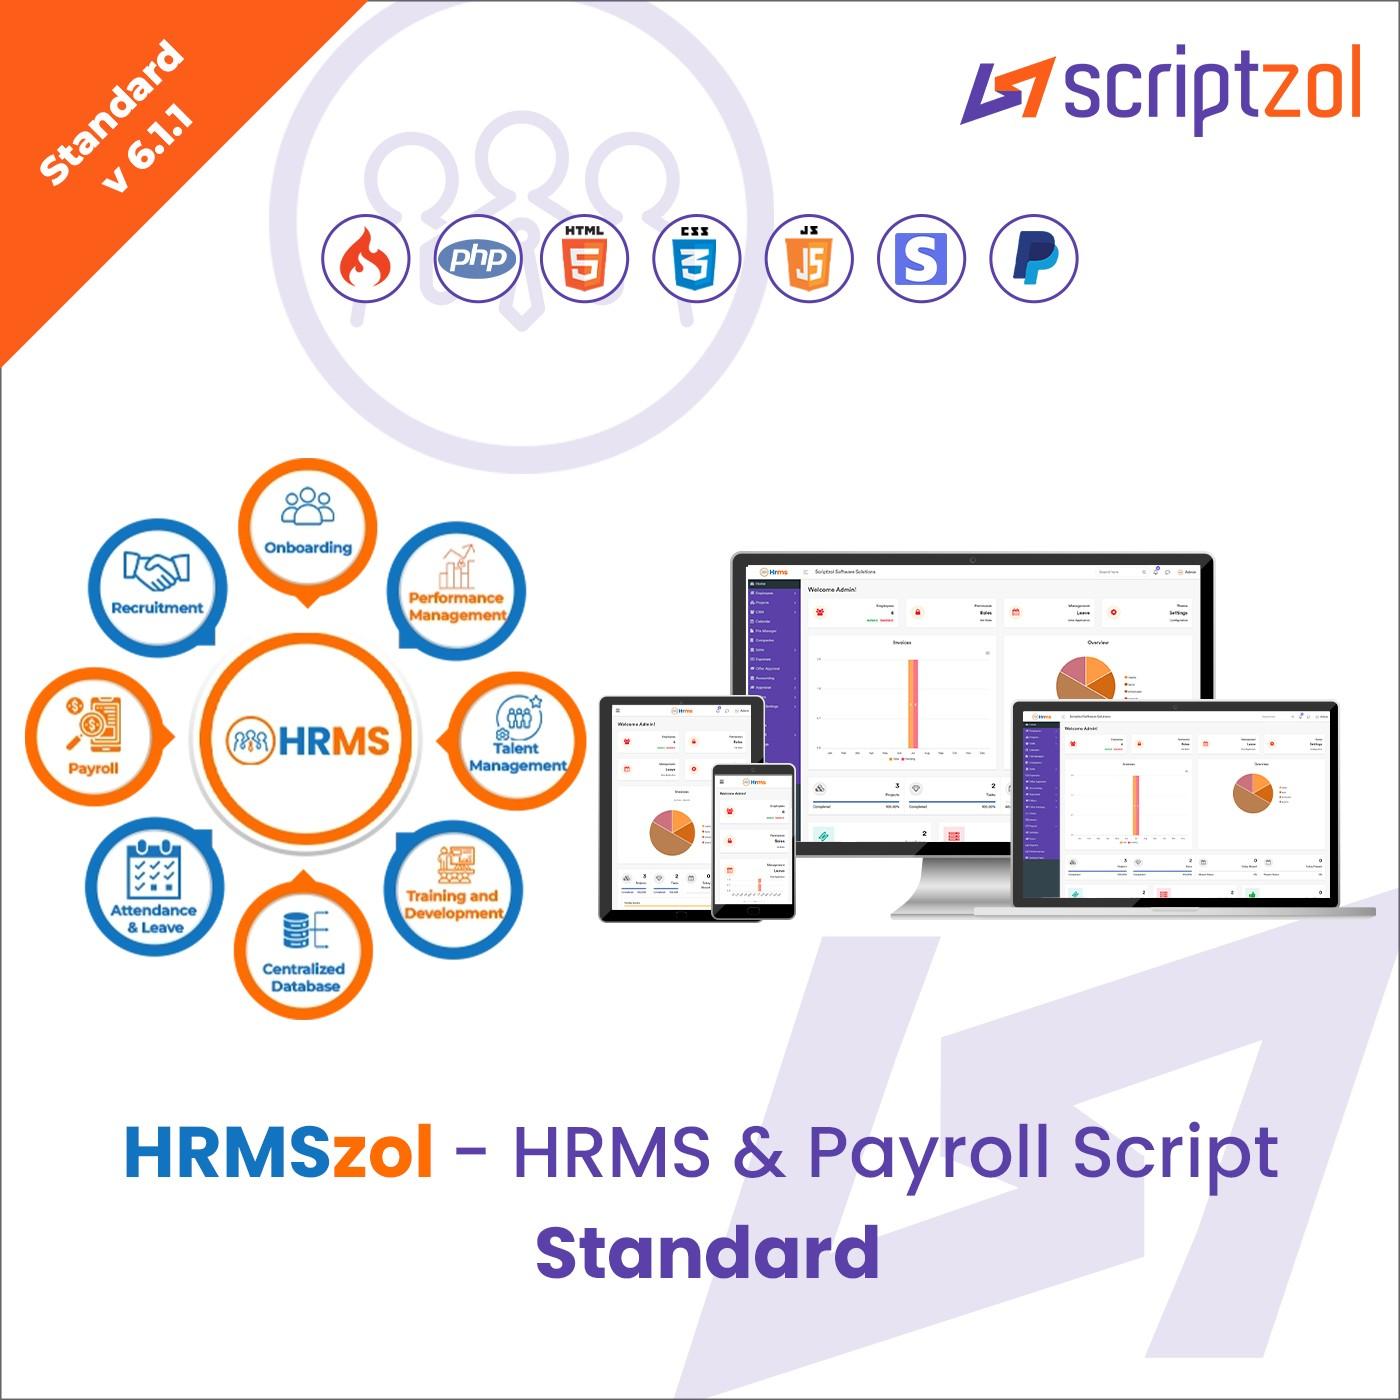 Product: HRMS & Payroll Software